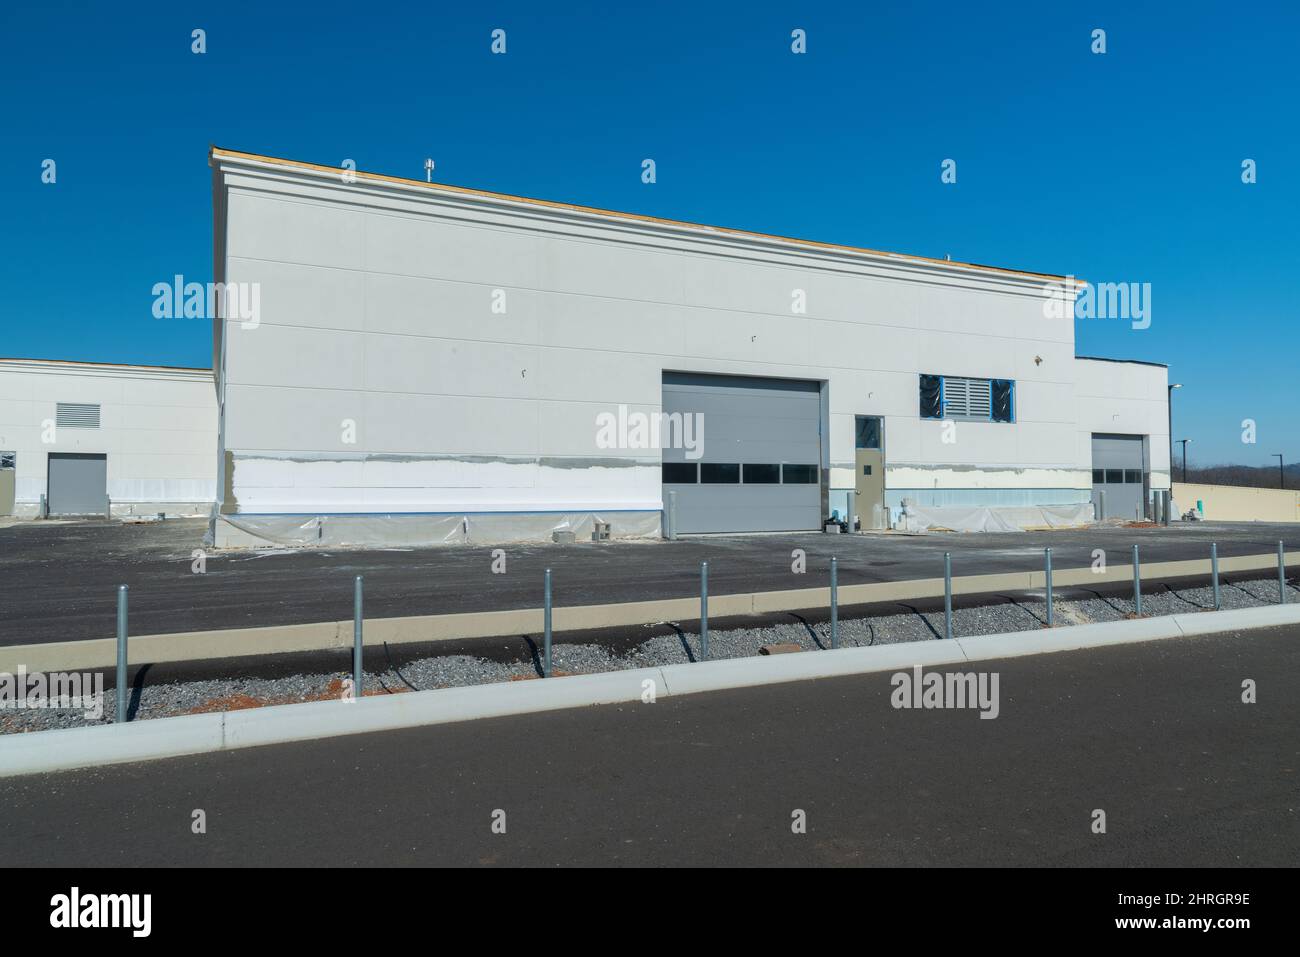 Horizontal shot of an industrial construction project with overhead doors nearing completion. Stock Photo